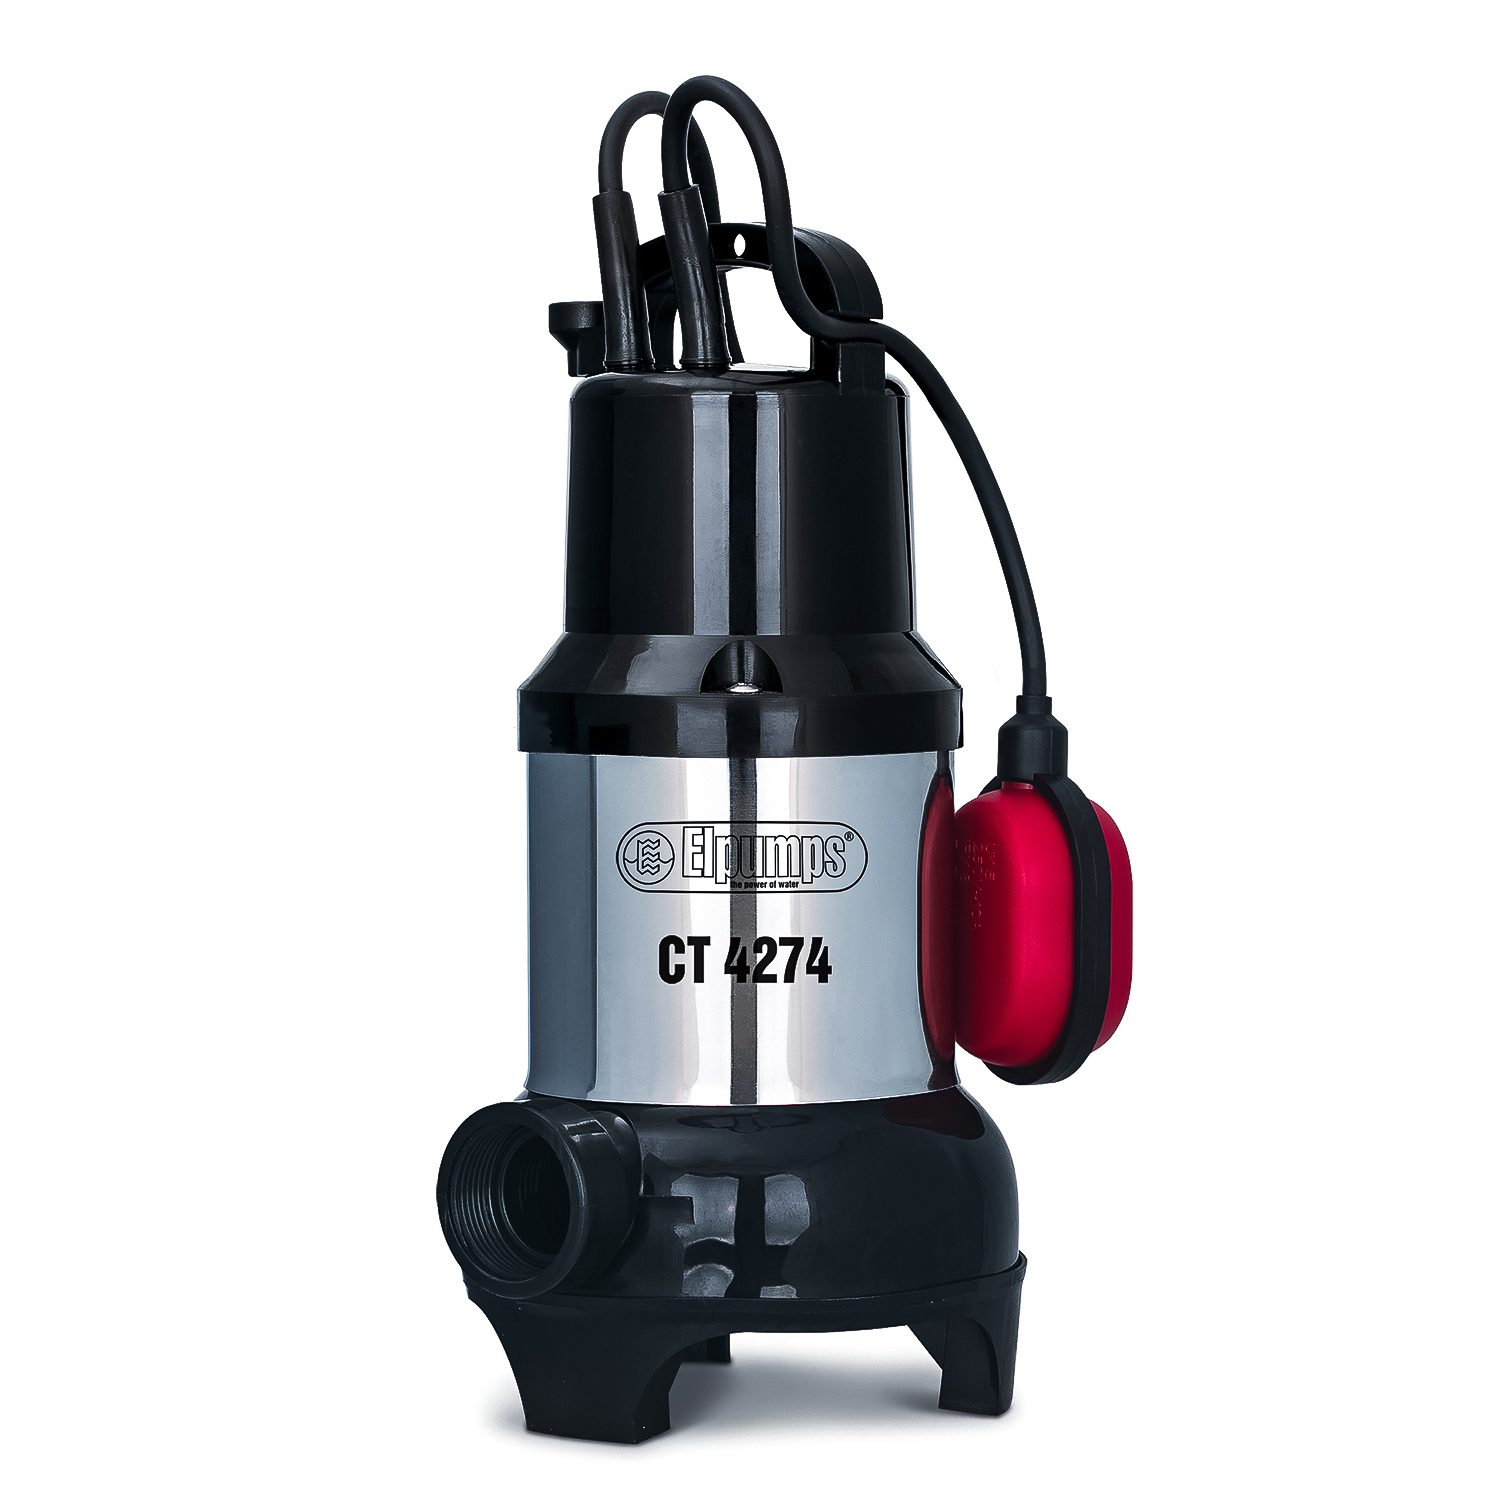 CT 4274 Submersible pumps for sewage